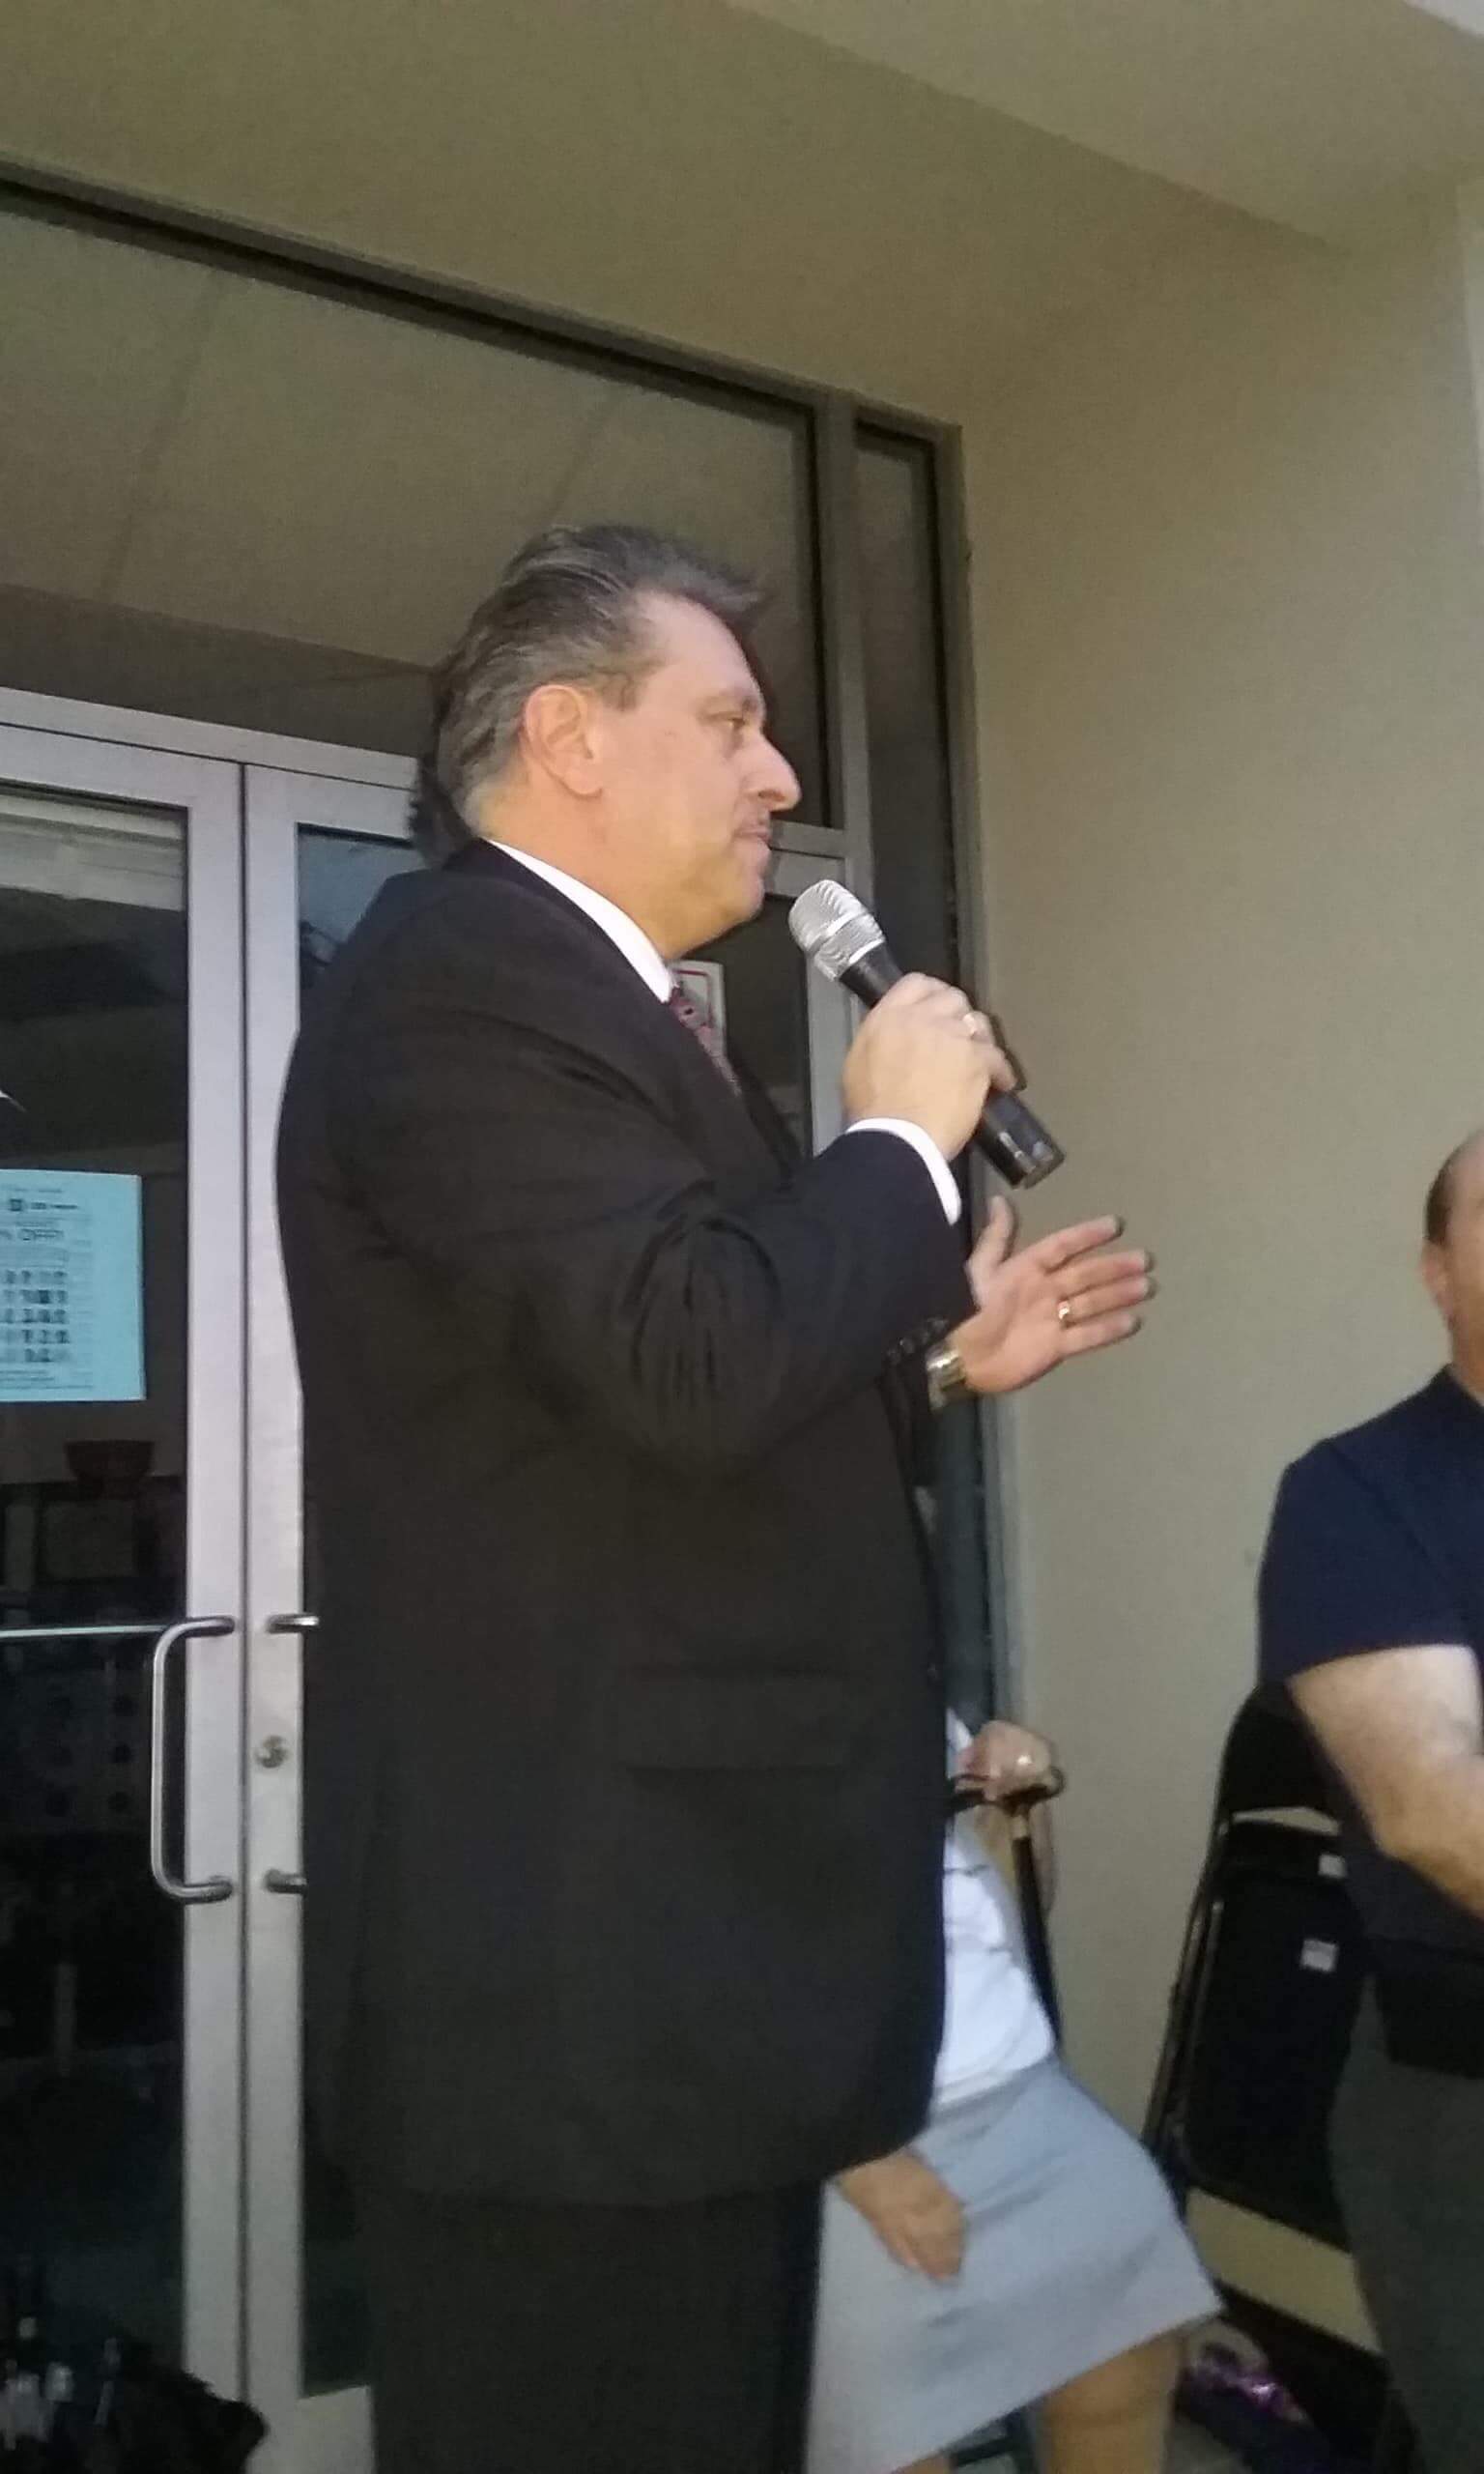 Senator Joseph Addabbo spoke out against the shelter again at the most recent protest against the proposed homeless shelter at Christ Evangelical Lutheran Church in Ozone Park.